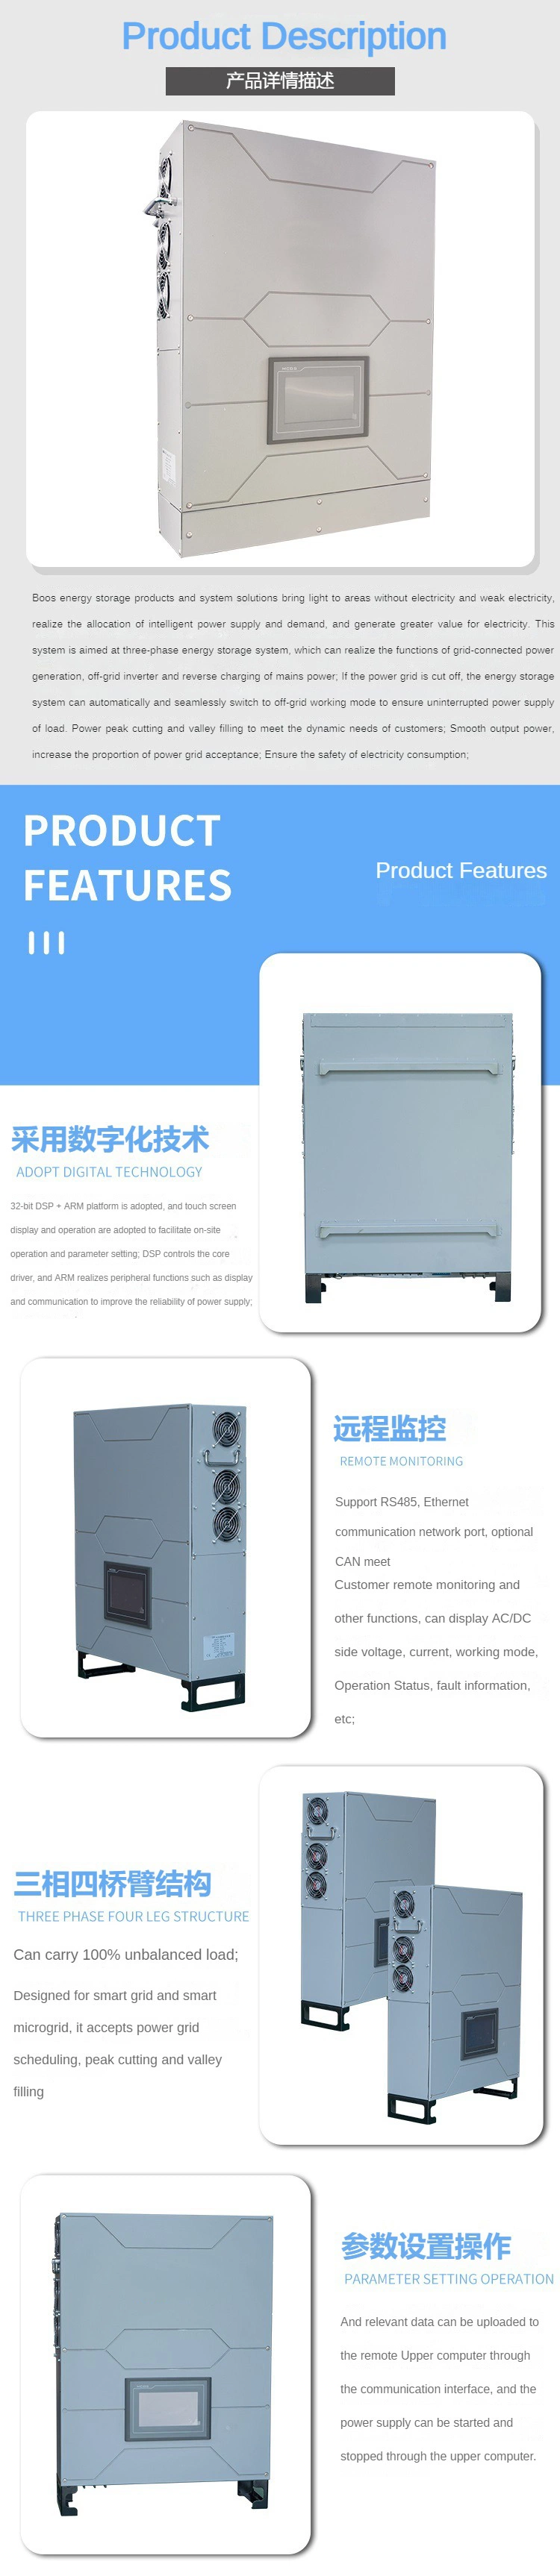 48V America Hybrid Solar Inverter 5kw 10kw with MPPT for Solar Power System for Home and Factory